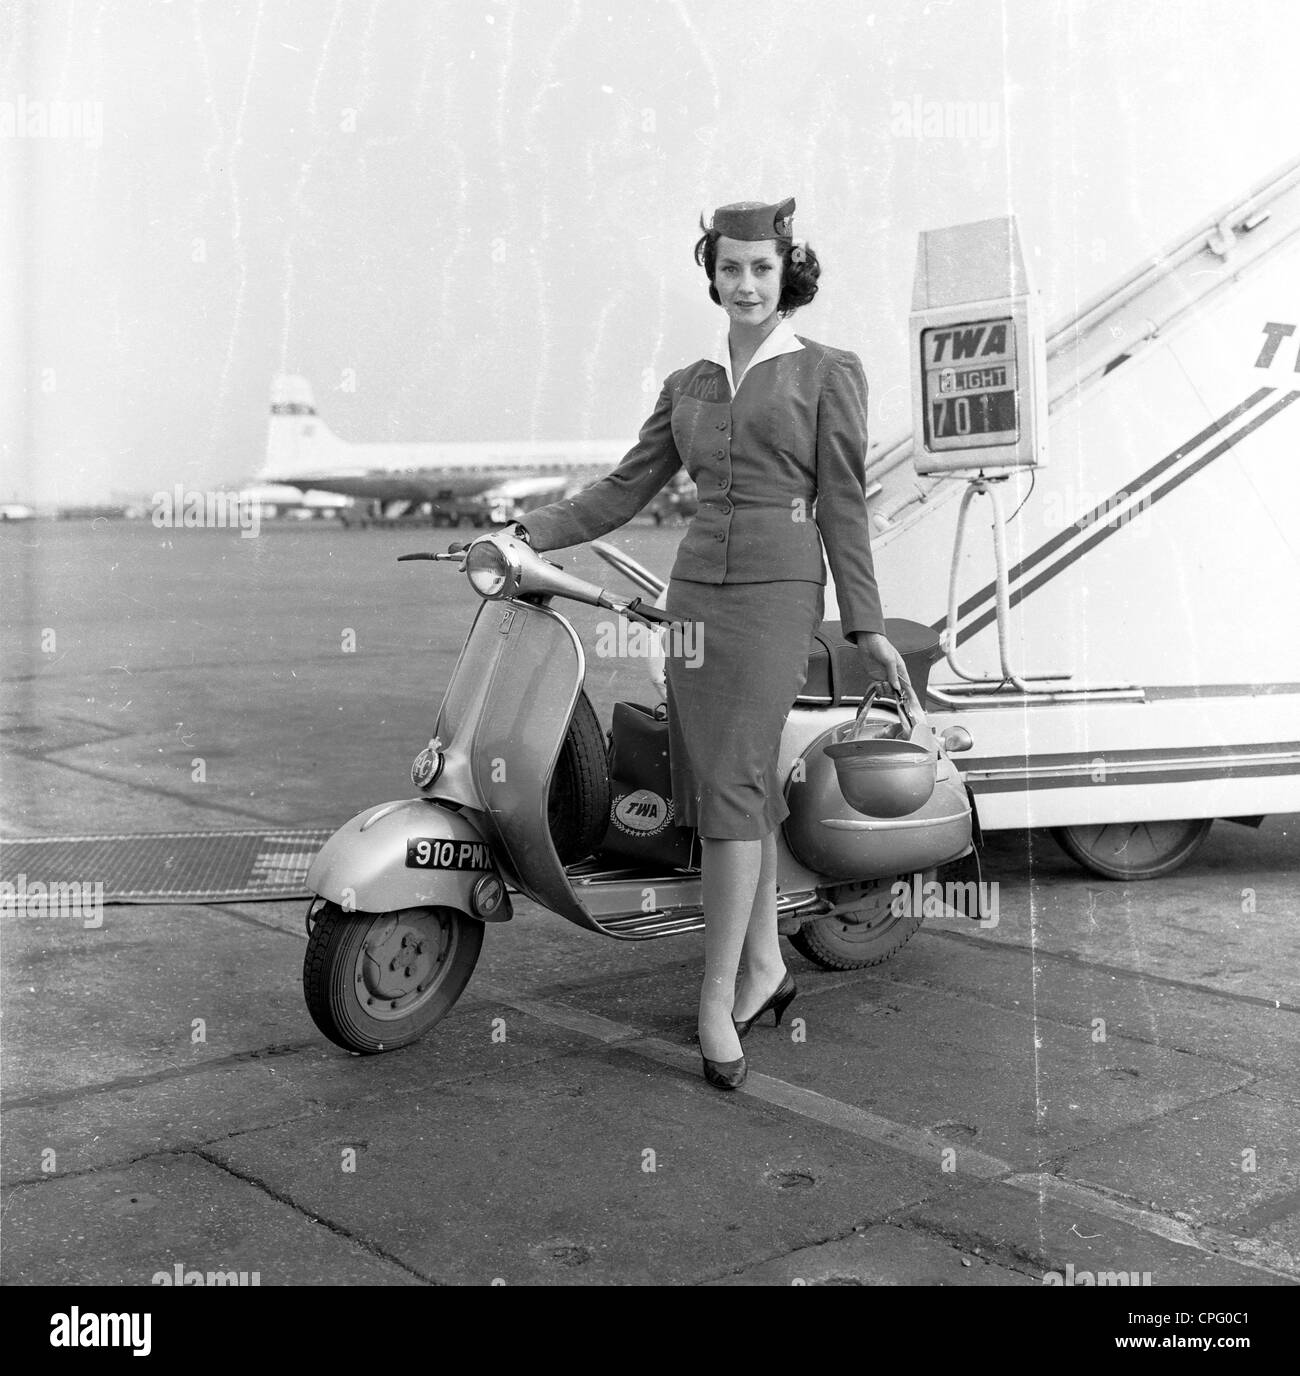 1960s, historical, an advertising still from this era promoting the new motor scooter, showing a glamorous TWA air stewardess at an airport, at the boarding steps of a plane, standing with helmet, by her new mode of transport, London Aiport, England, UK.. Stock Photo